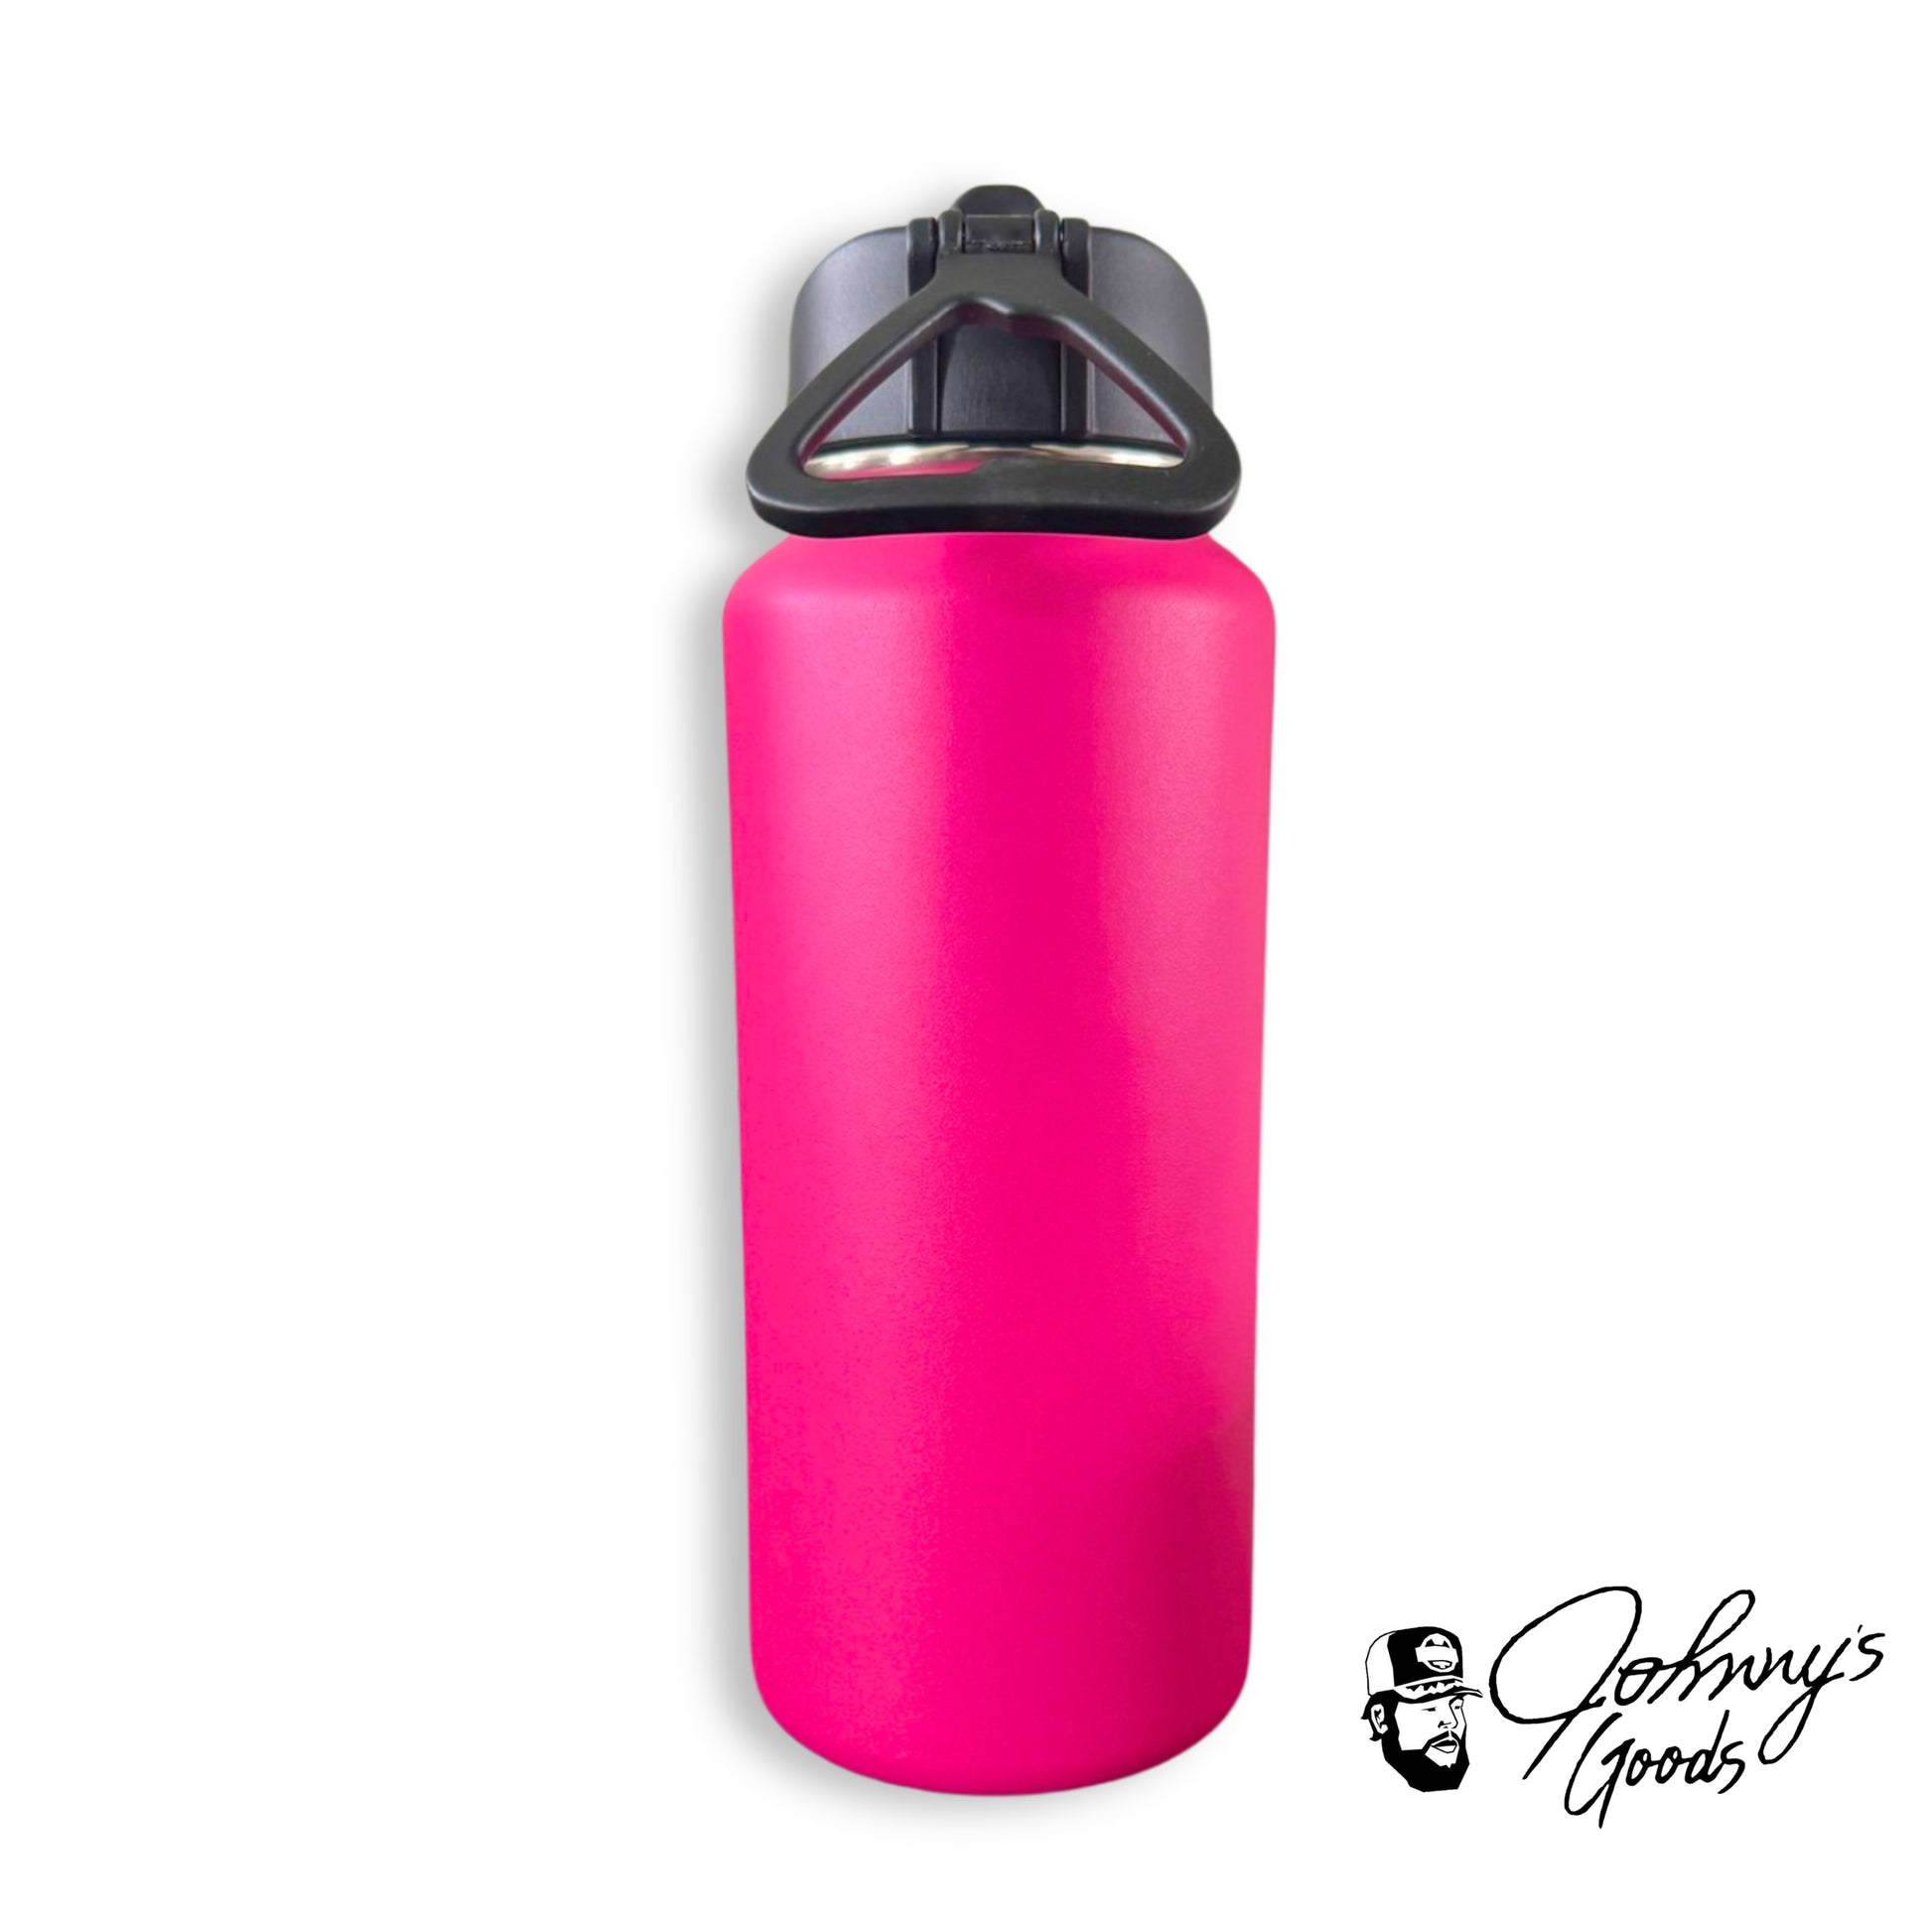 Swiftie Tumbler, Bright Pink Taylor Swift Cup